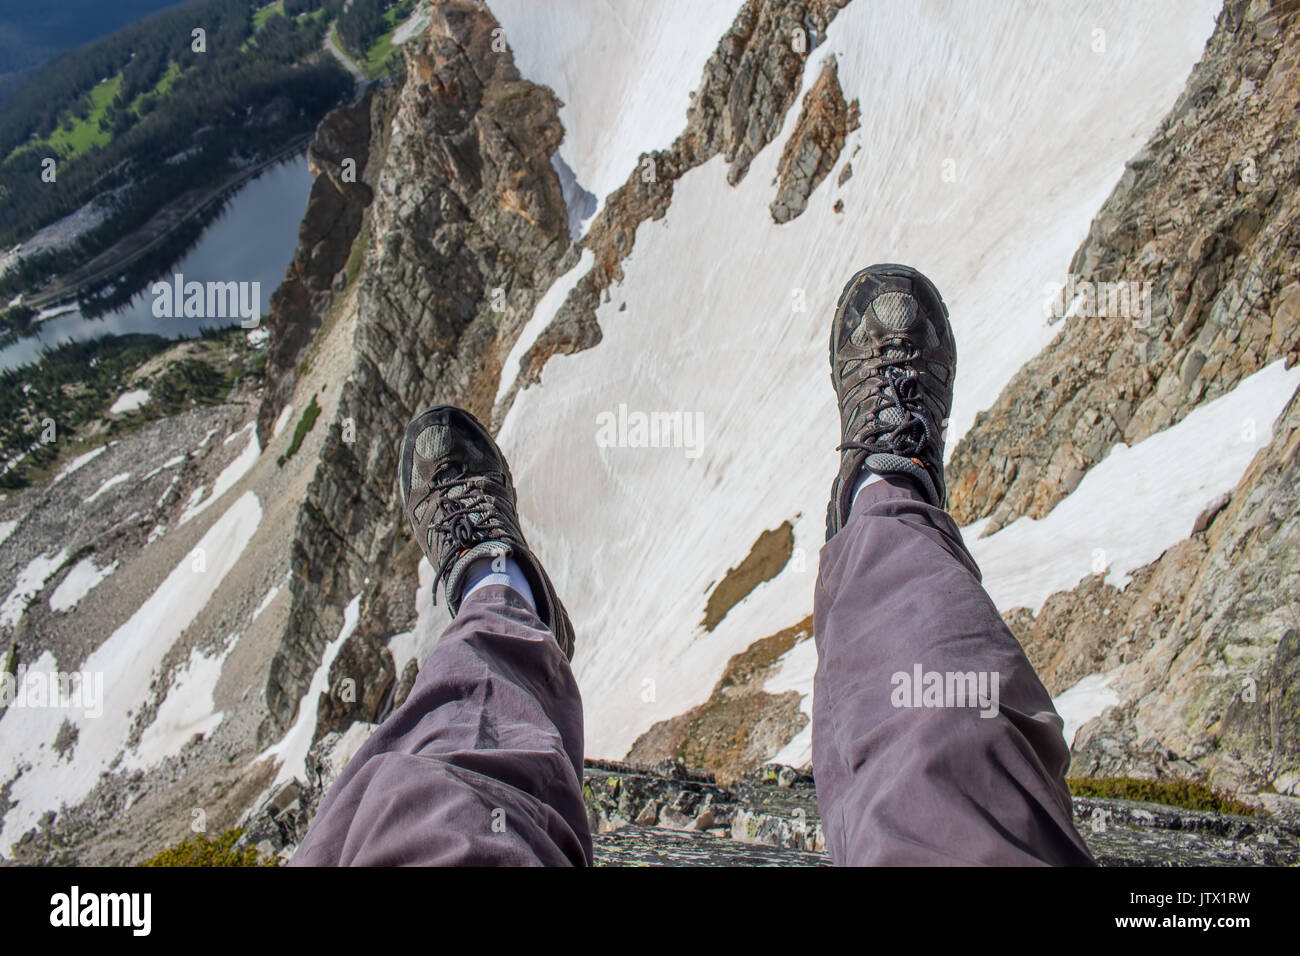 A hiker dangles his legs over the edge of a cliff in the Rocky Mountains. Stock Photo